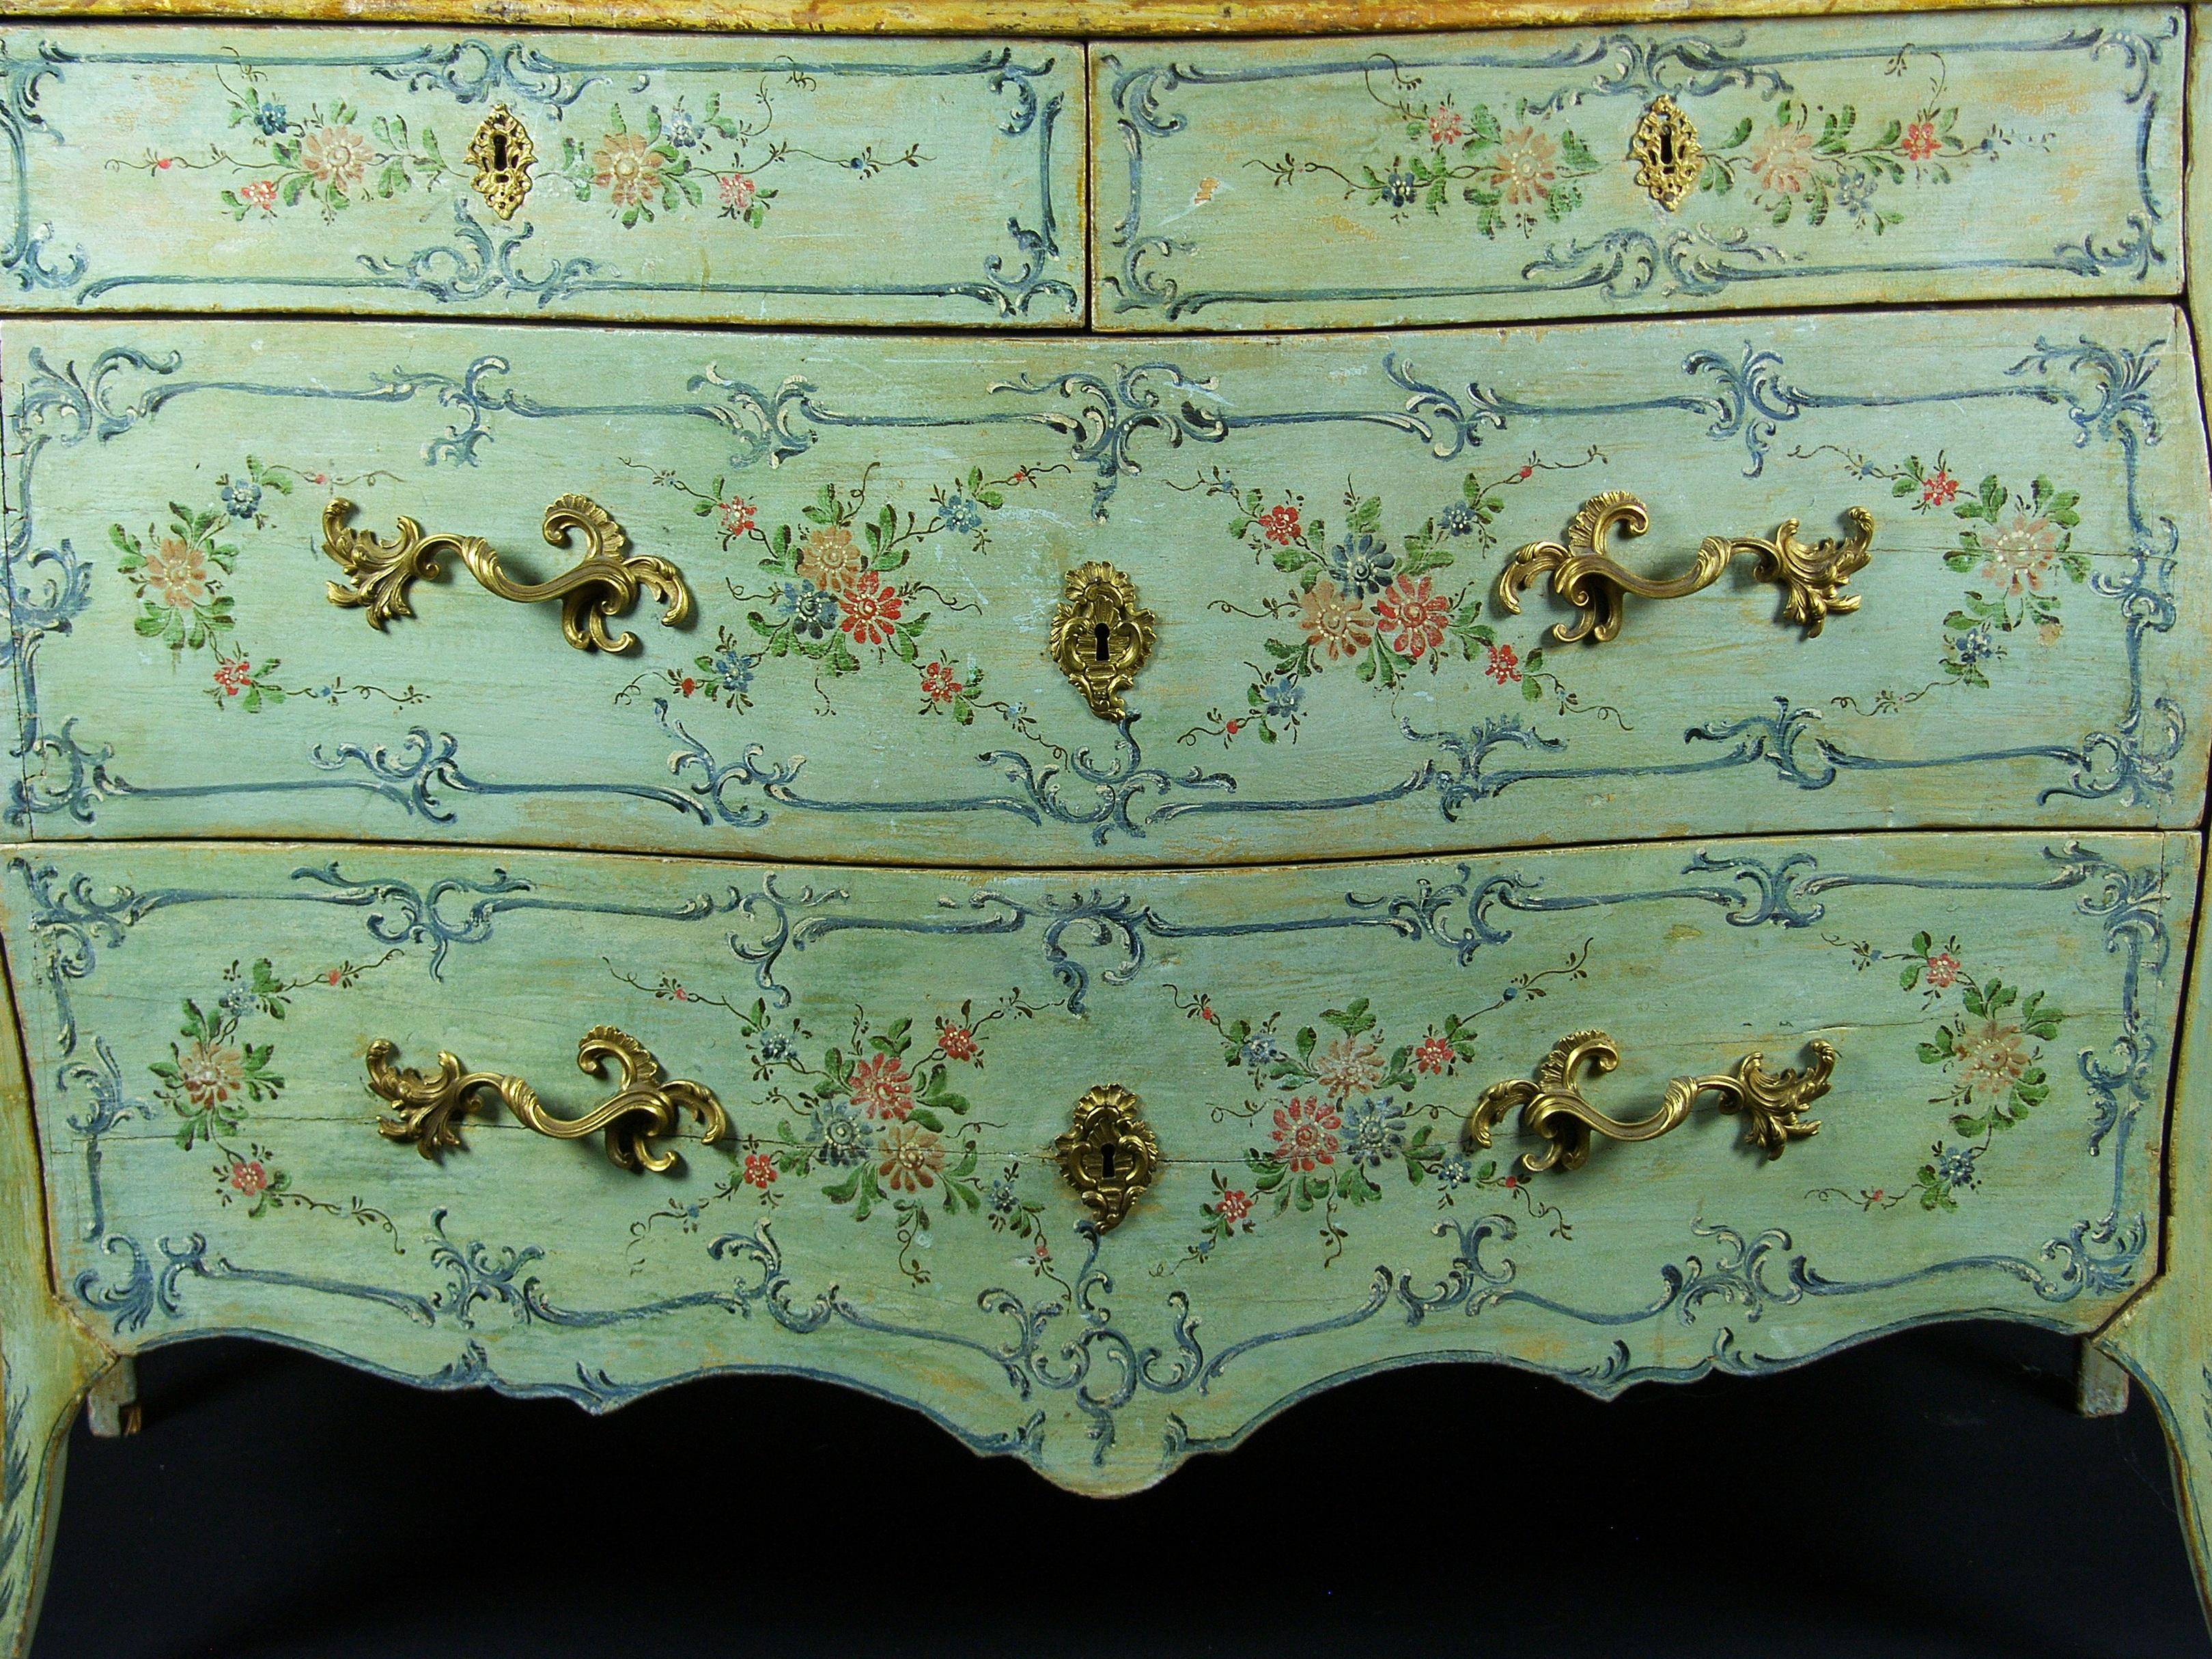 18th Century Italian Polychrome Lacquered Wooden Dresser with Floral Decorations 5